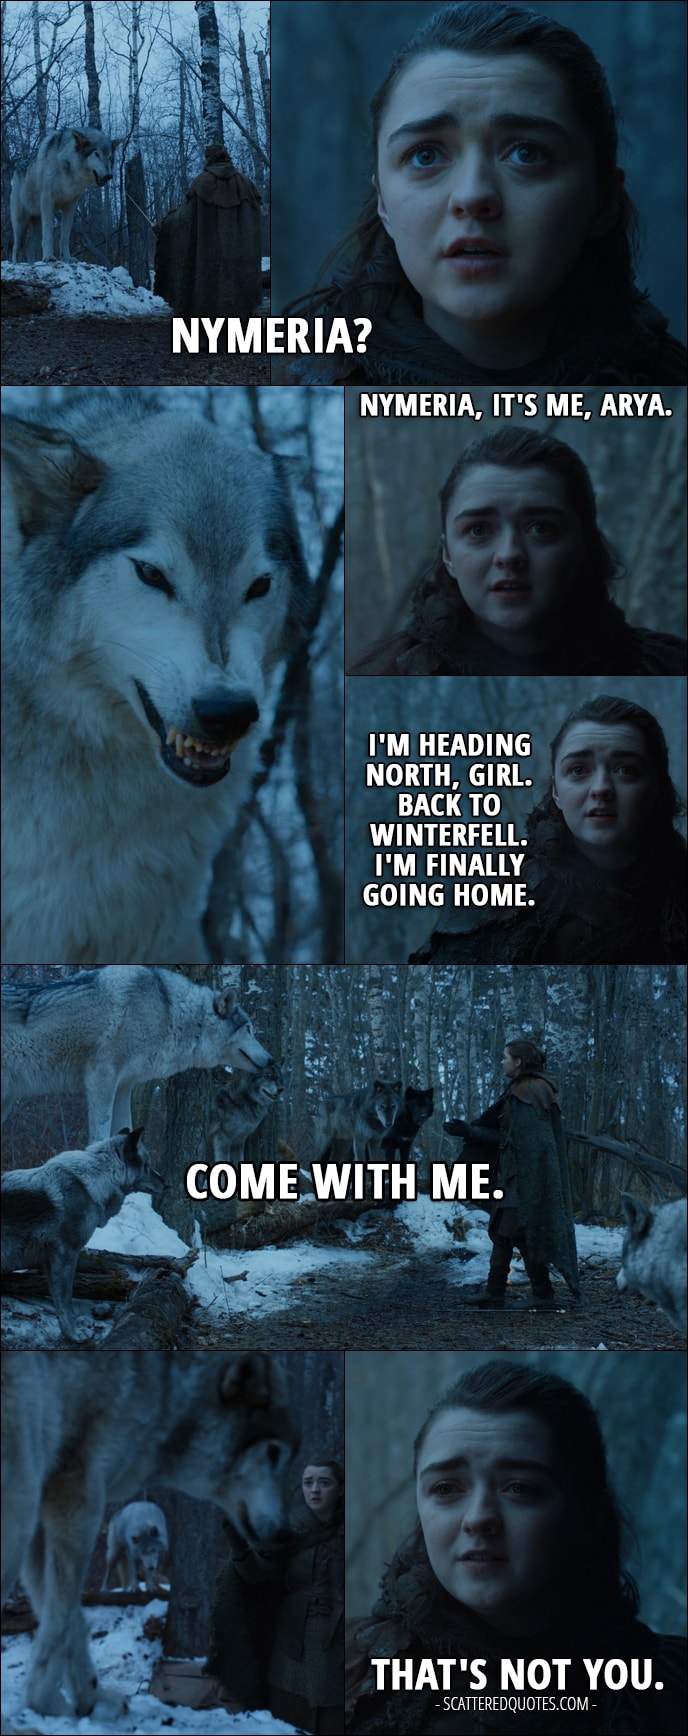 Quote from Game of Thrones 7x02 - Arya Stark: Nymeria? Nymeria, it's me, Arya. I'm heading north, girl. Back to Winterfell. I'm finally going home. Come with me. Come with me. That's not you.